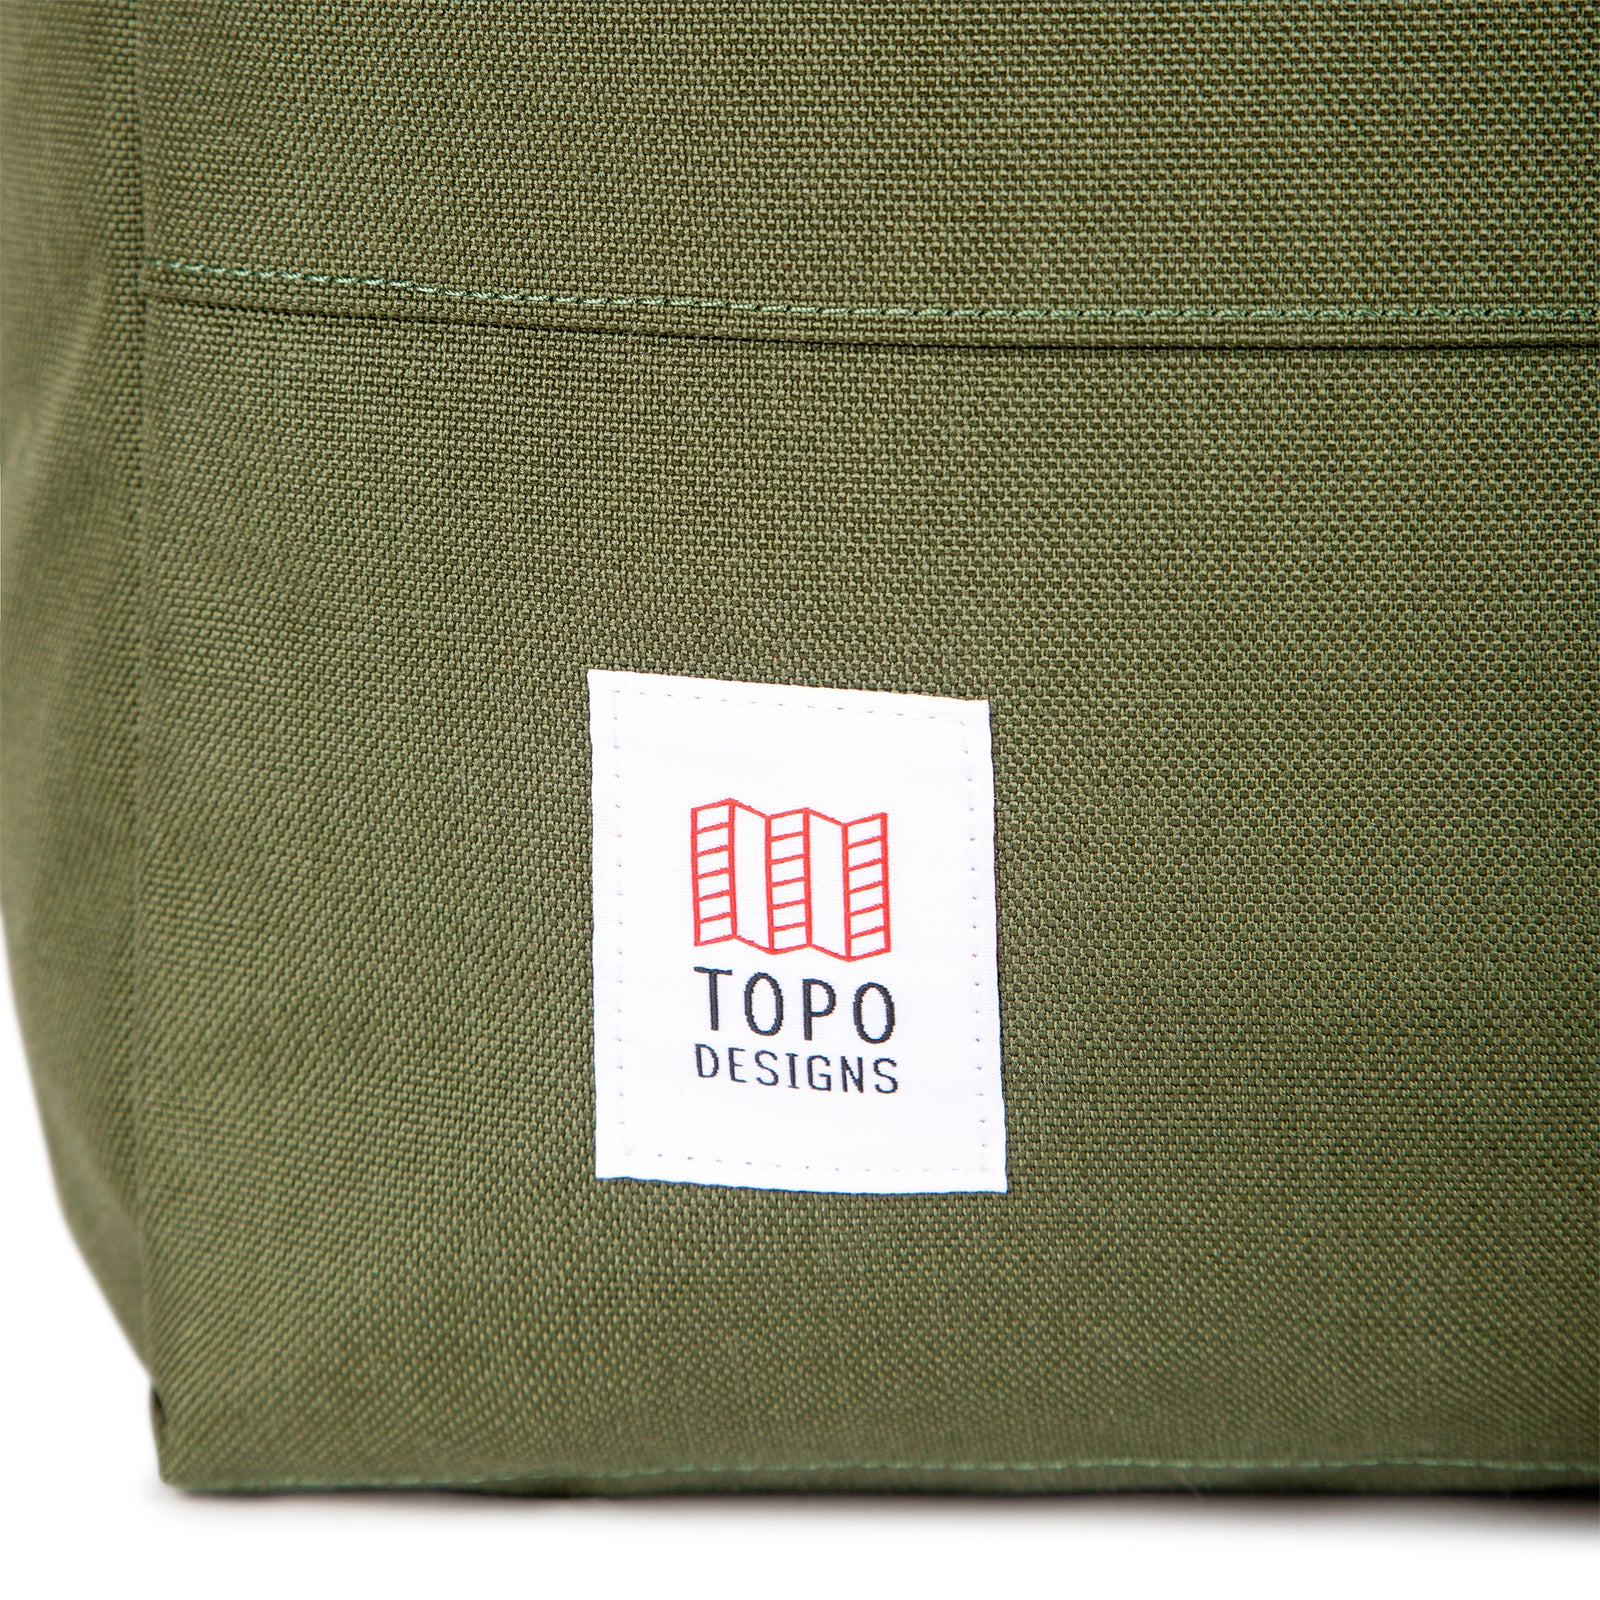 General shot of front logo patch on Topo Designs Daypack Classic 100% recycled nylon laptop backpack for work or school in Olive green.